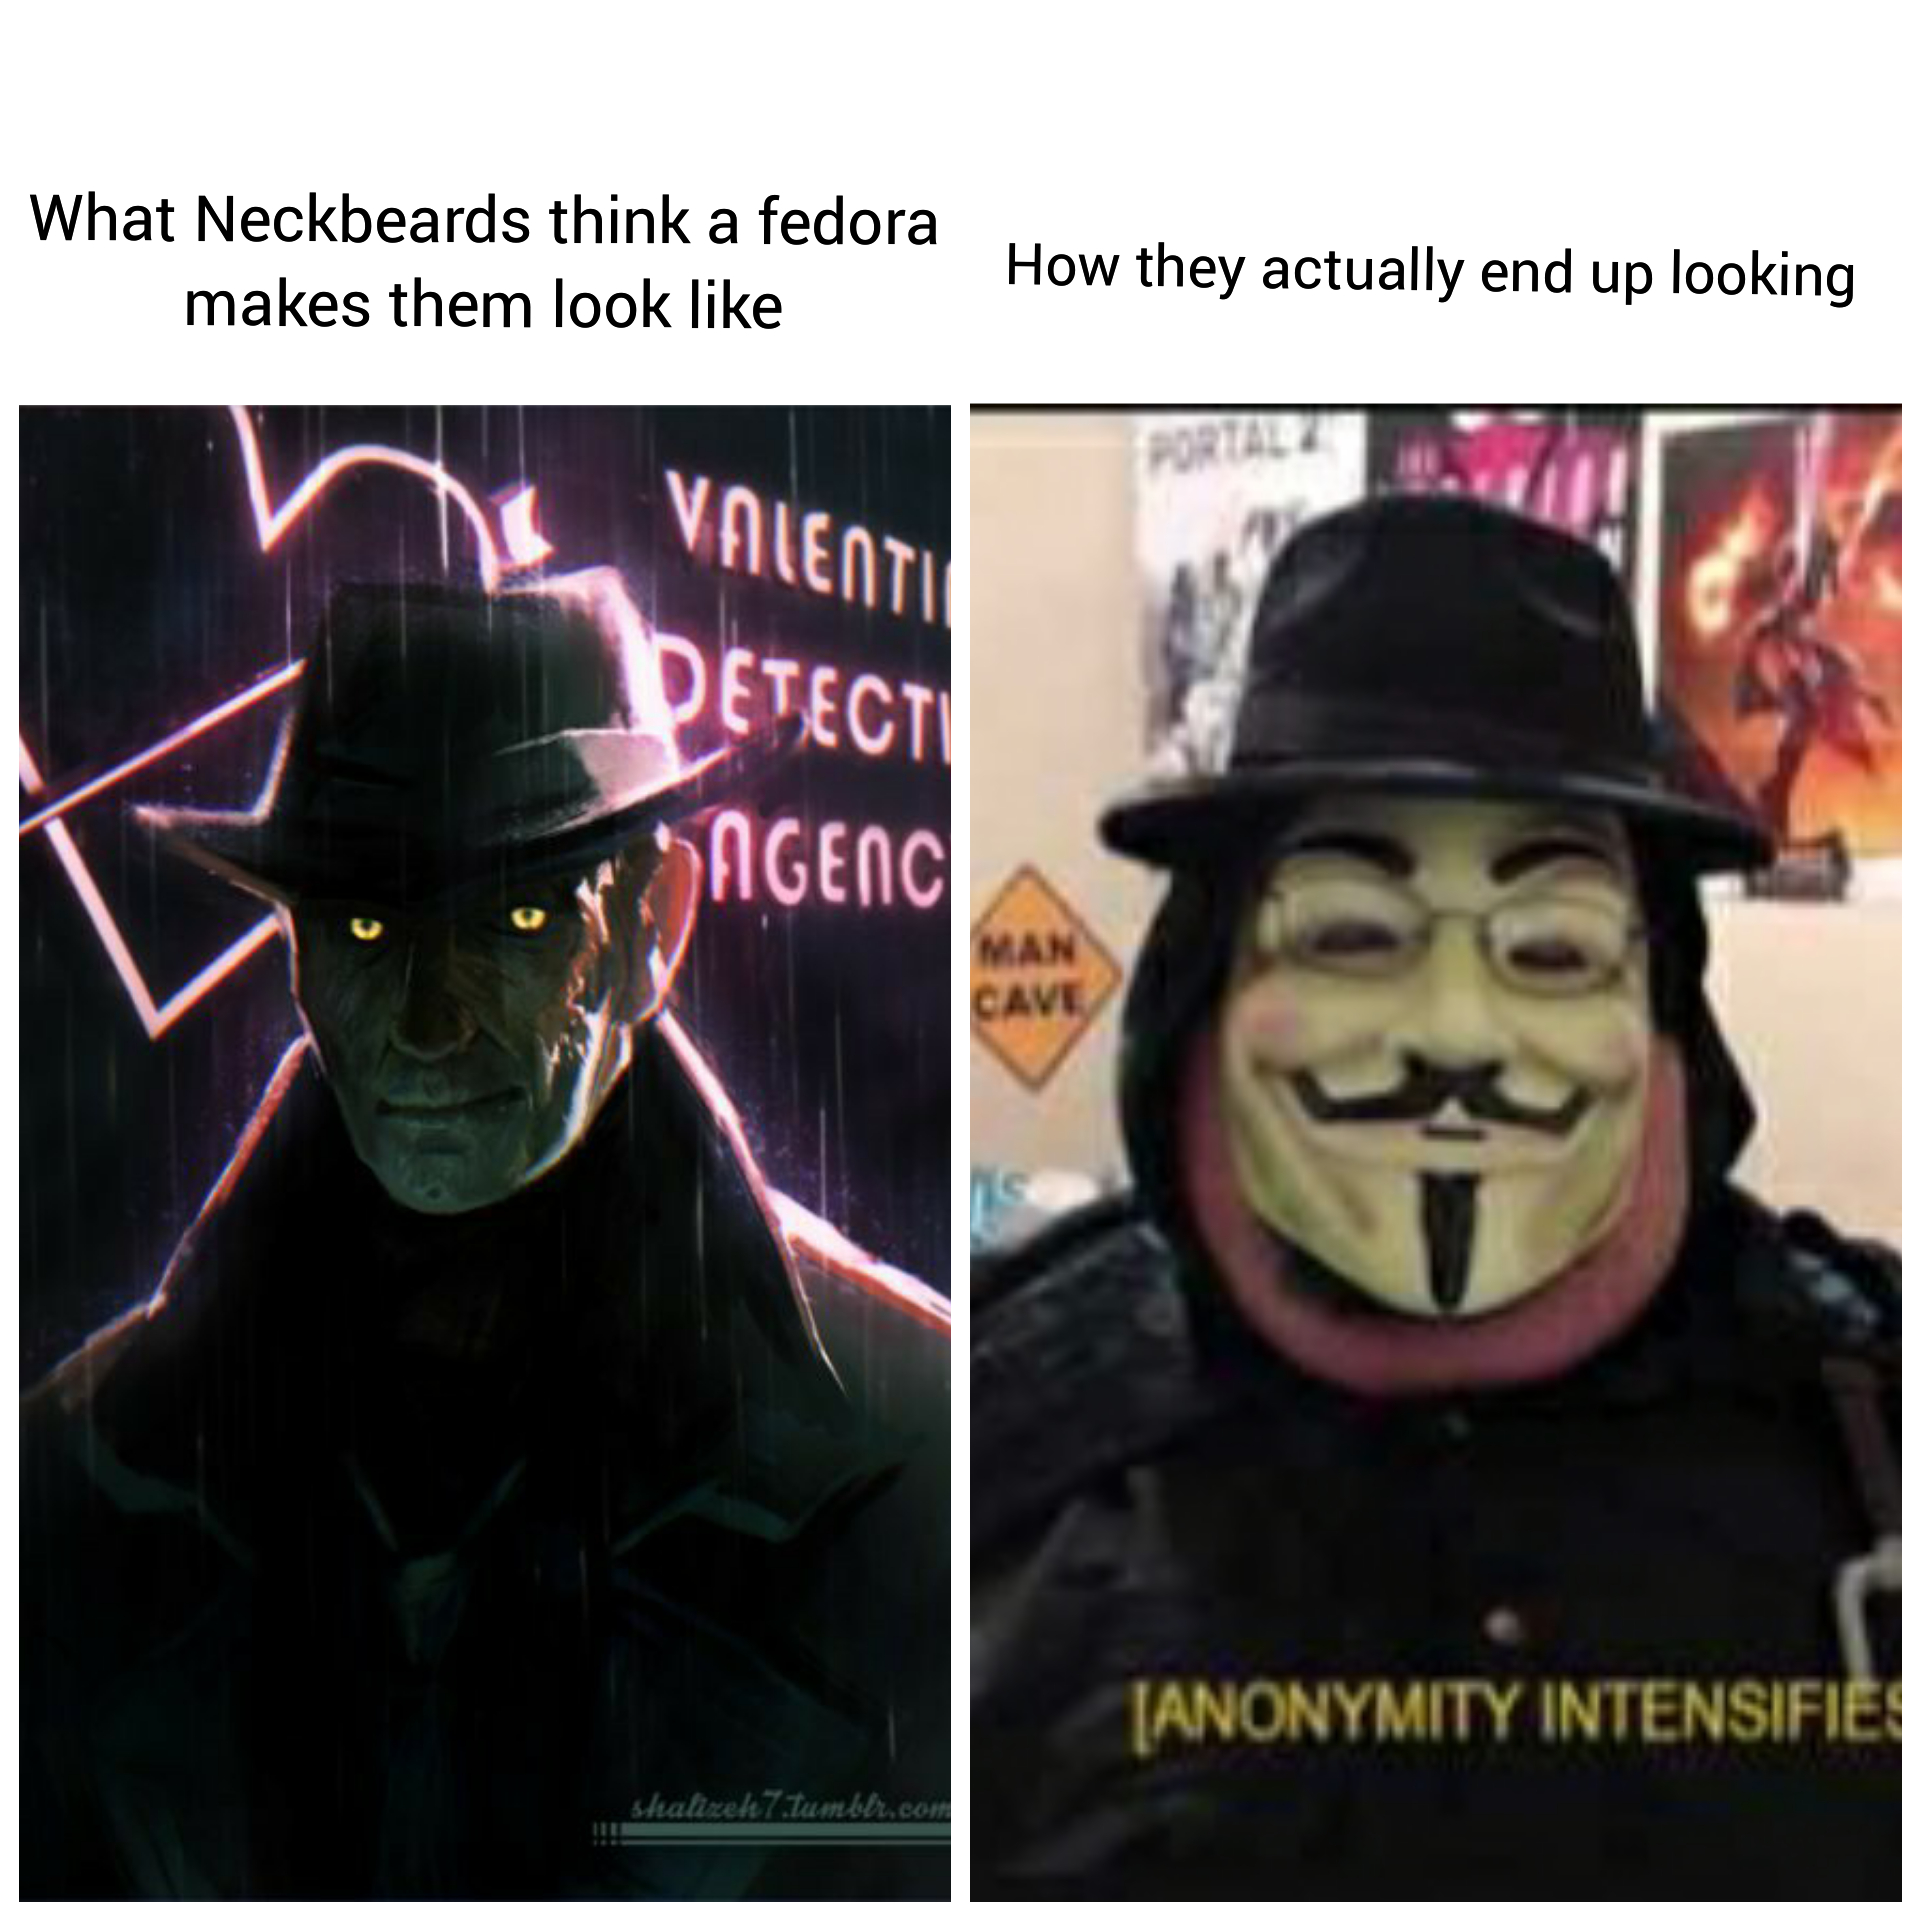 anonymity intensifies - What Neckbeards think a fedora makes them look How they actually end up looking n Valentin Detect Agenc Anonymity Intensifie